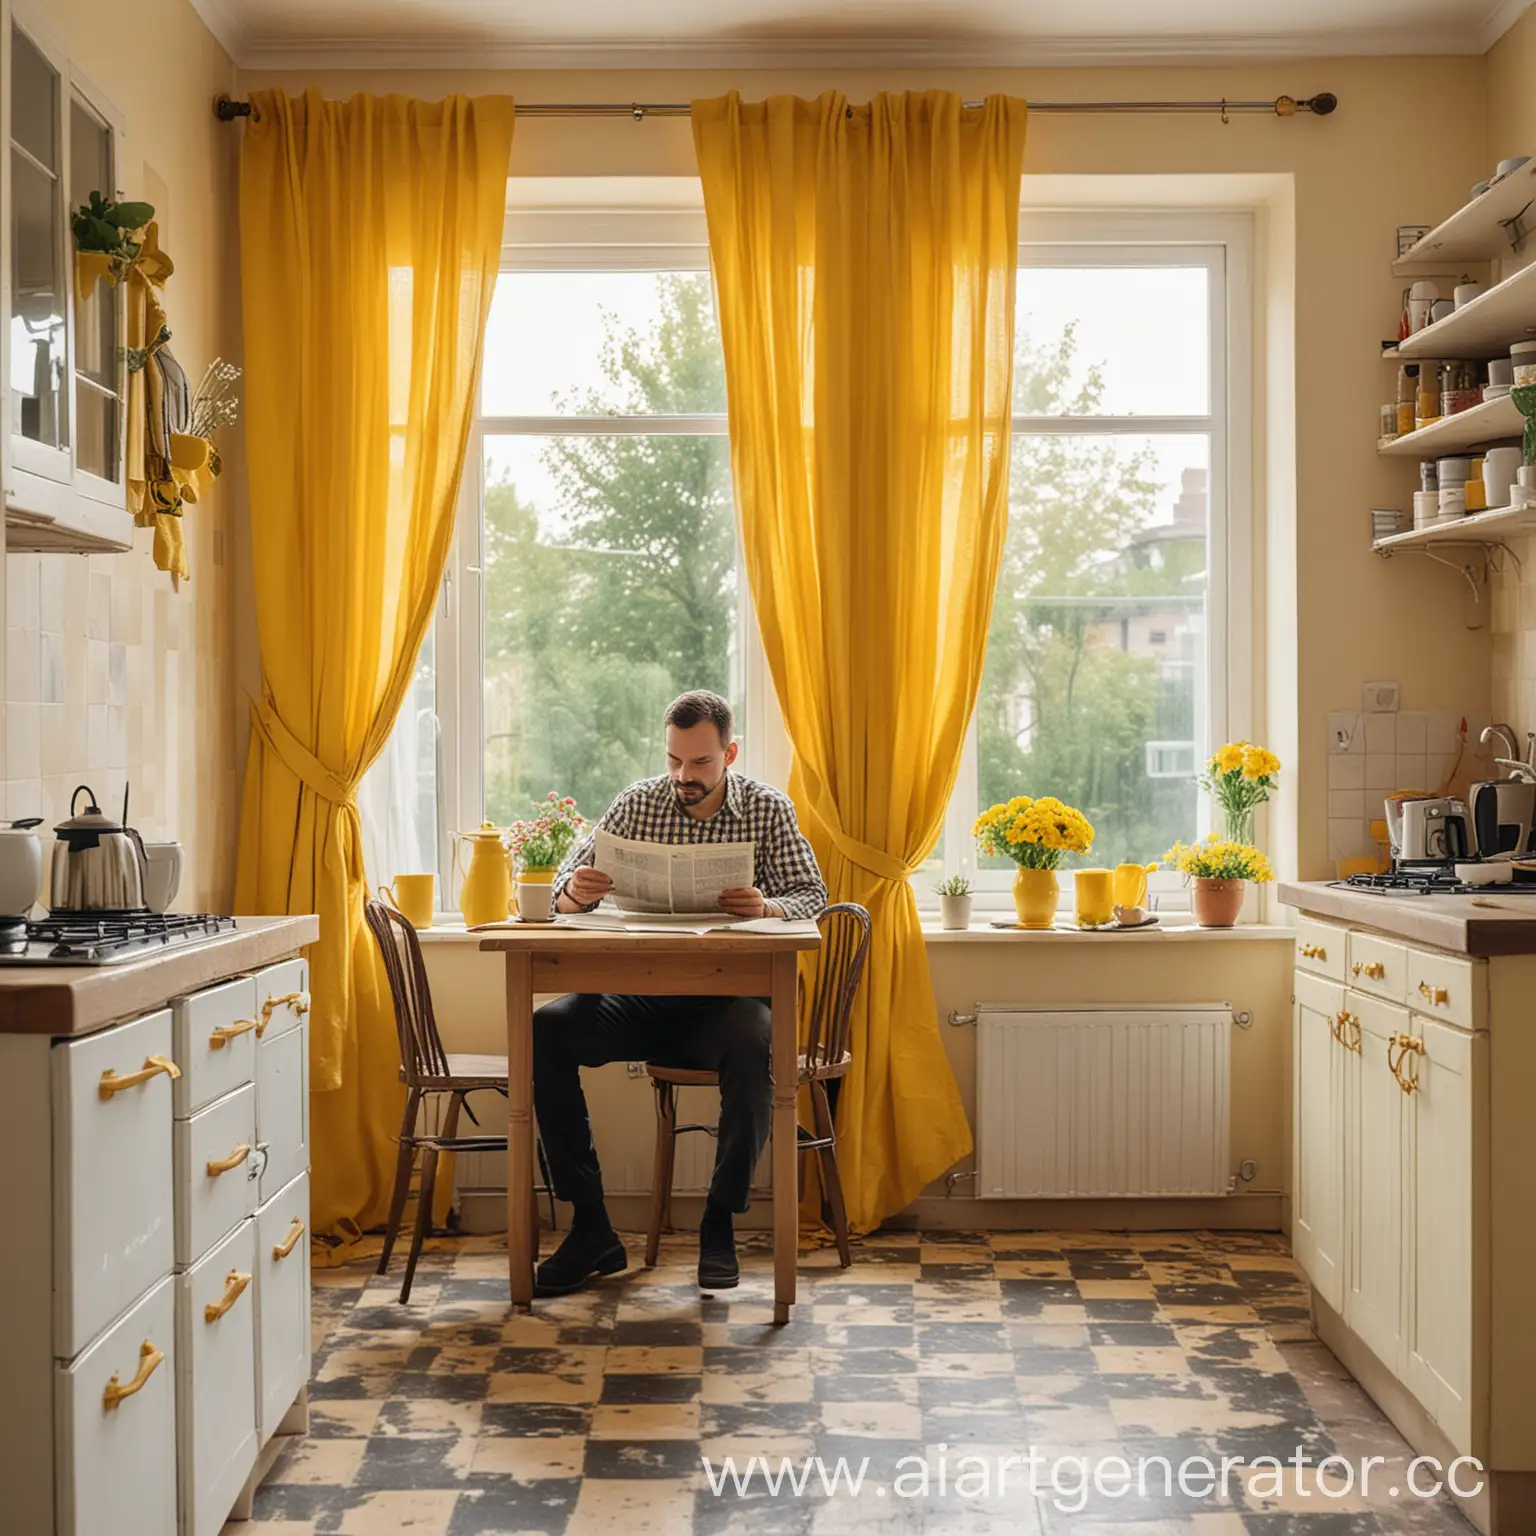 Man-Enjoying-Morning-Coffee-and-Newspaper-in-Cozy-Kitchen-Setting